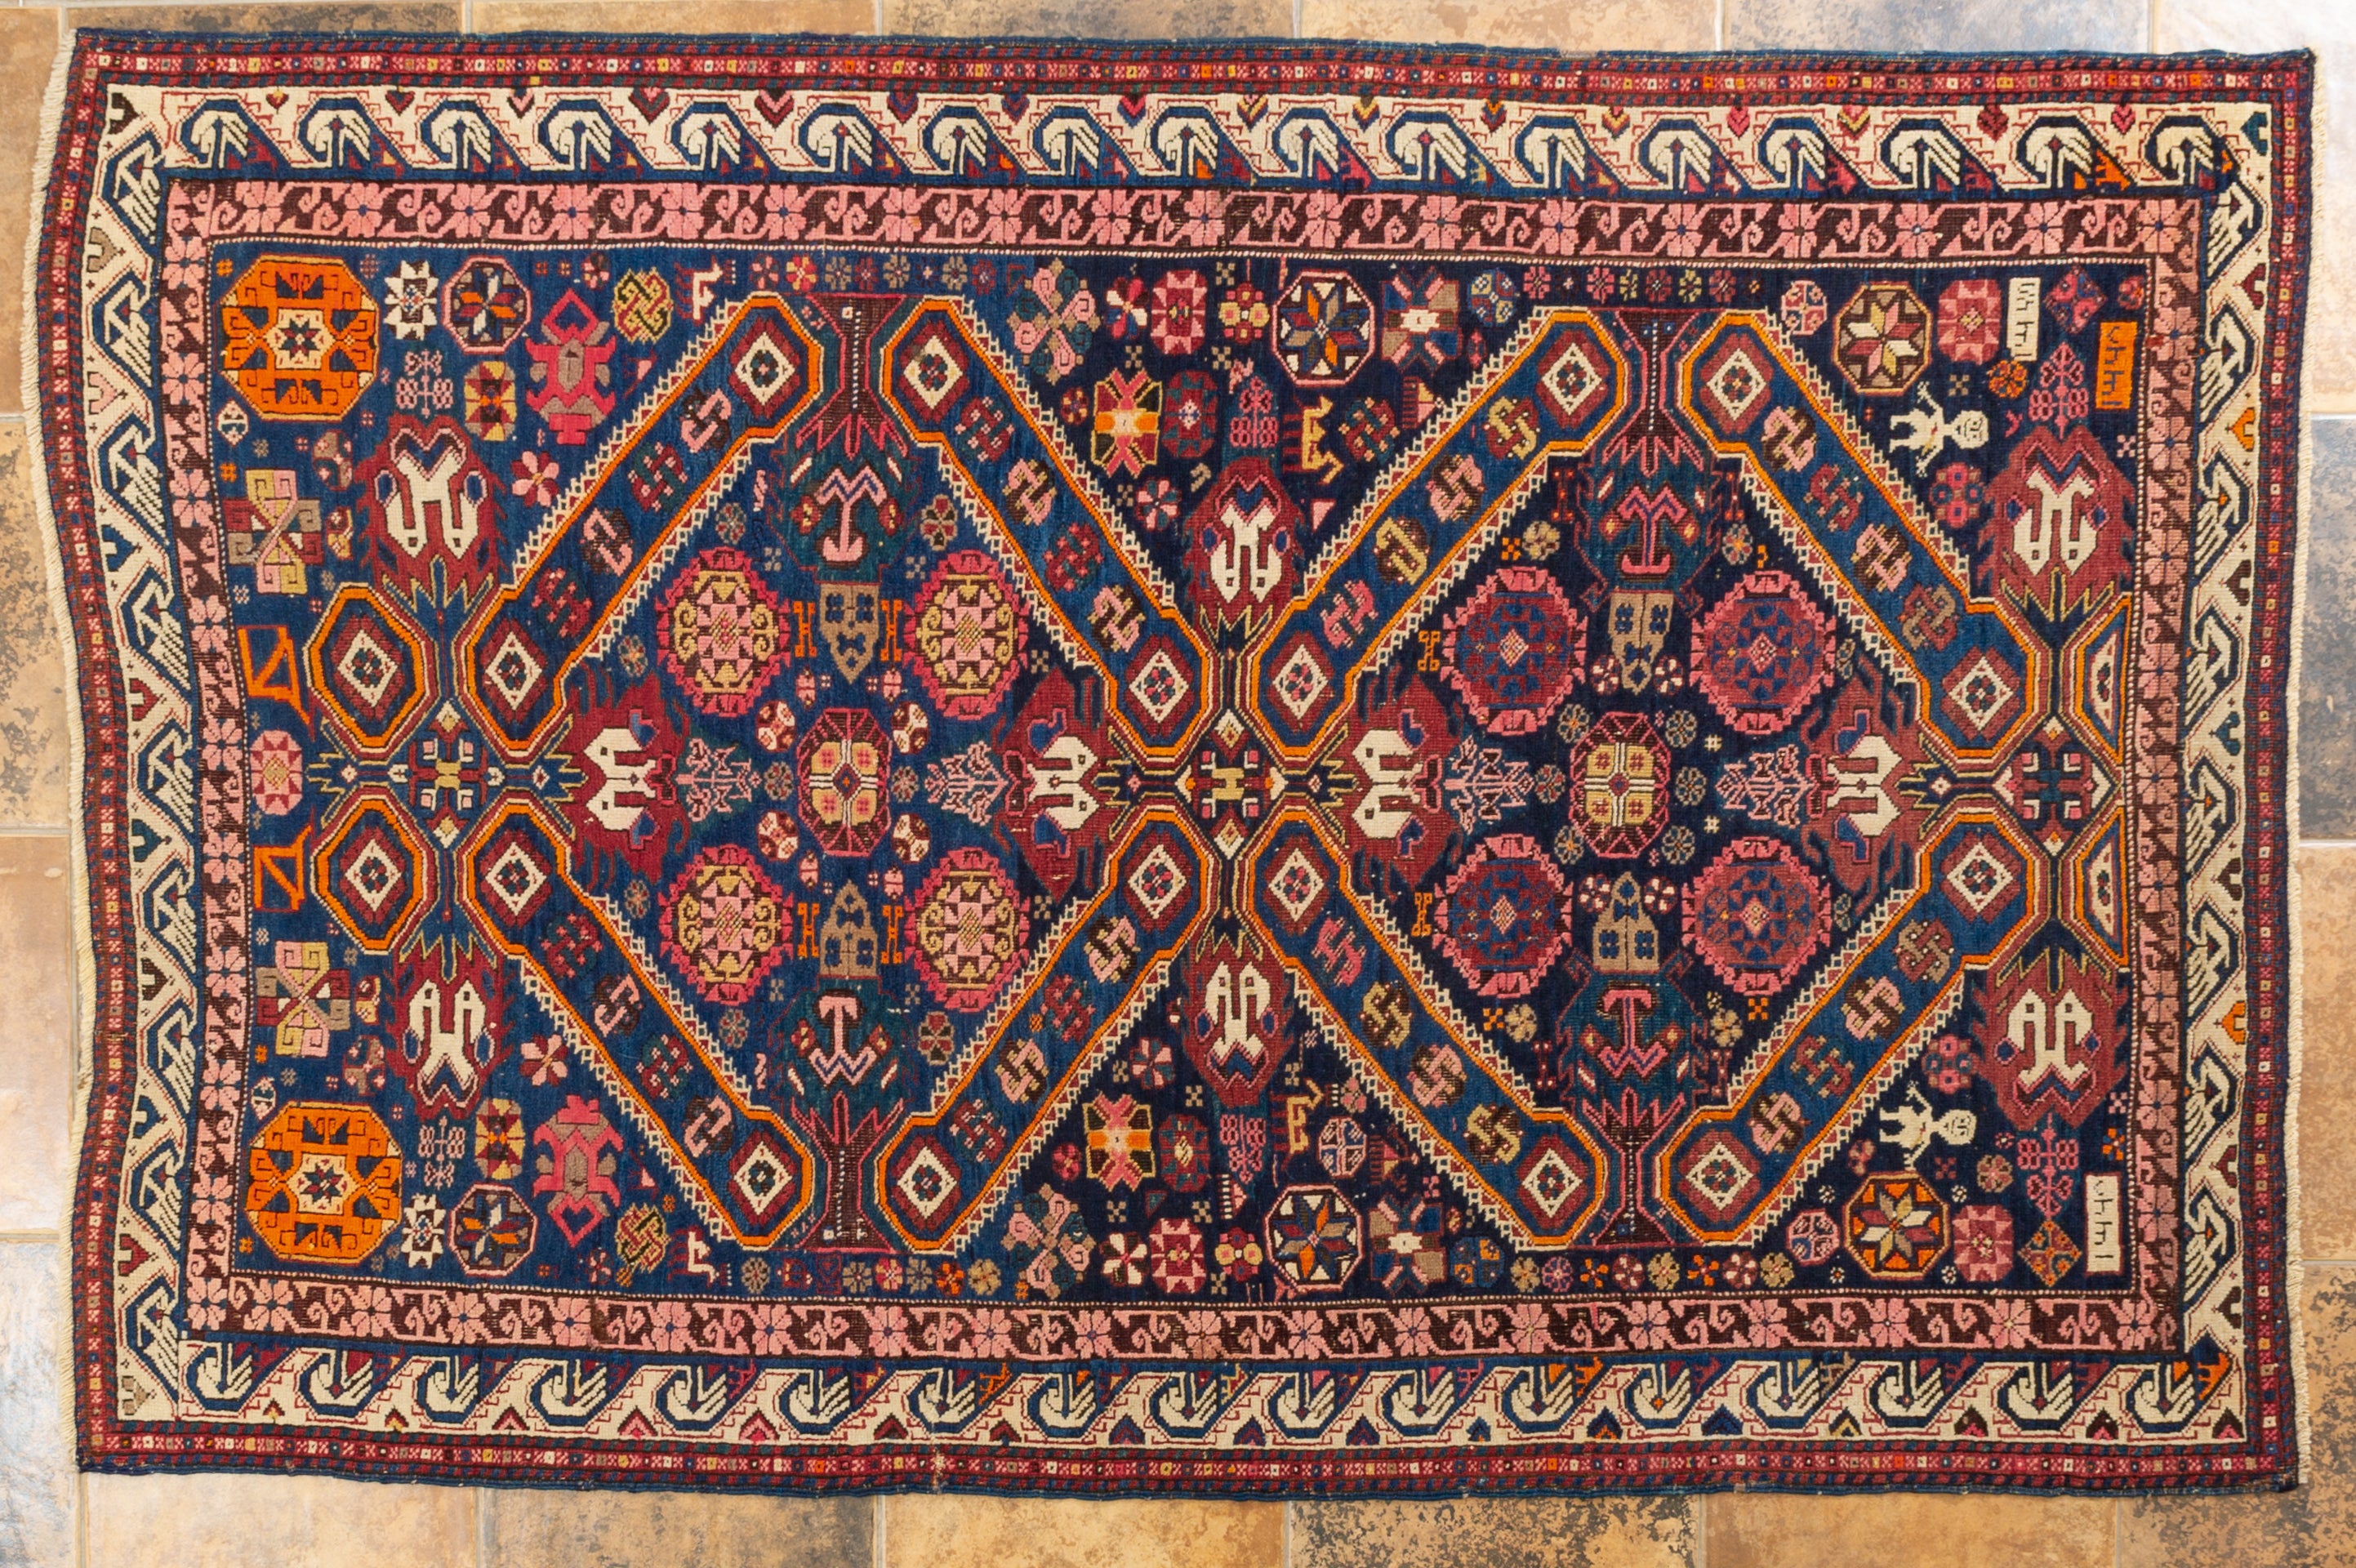 nr. 432 - Antique SHIRVAN dated 1328 (=1910) in beautiful colors on a bleu ground. One of the most beautiful Caucasian carpets I 've seen. 
The field is completely covered by many designs, also with men's small figures representing the weaver with